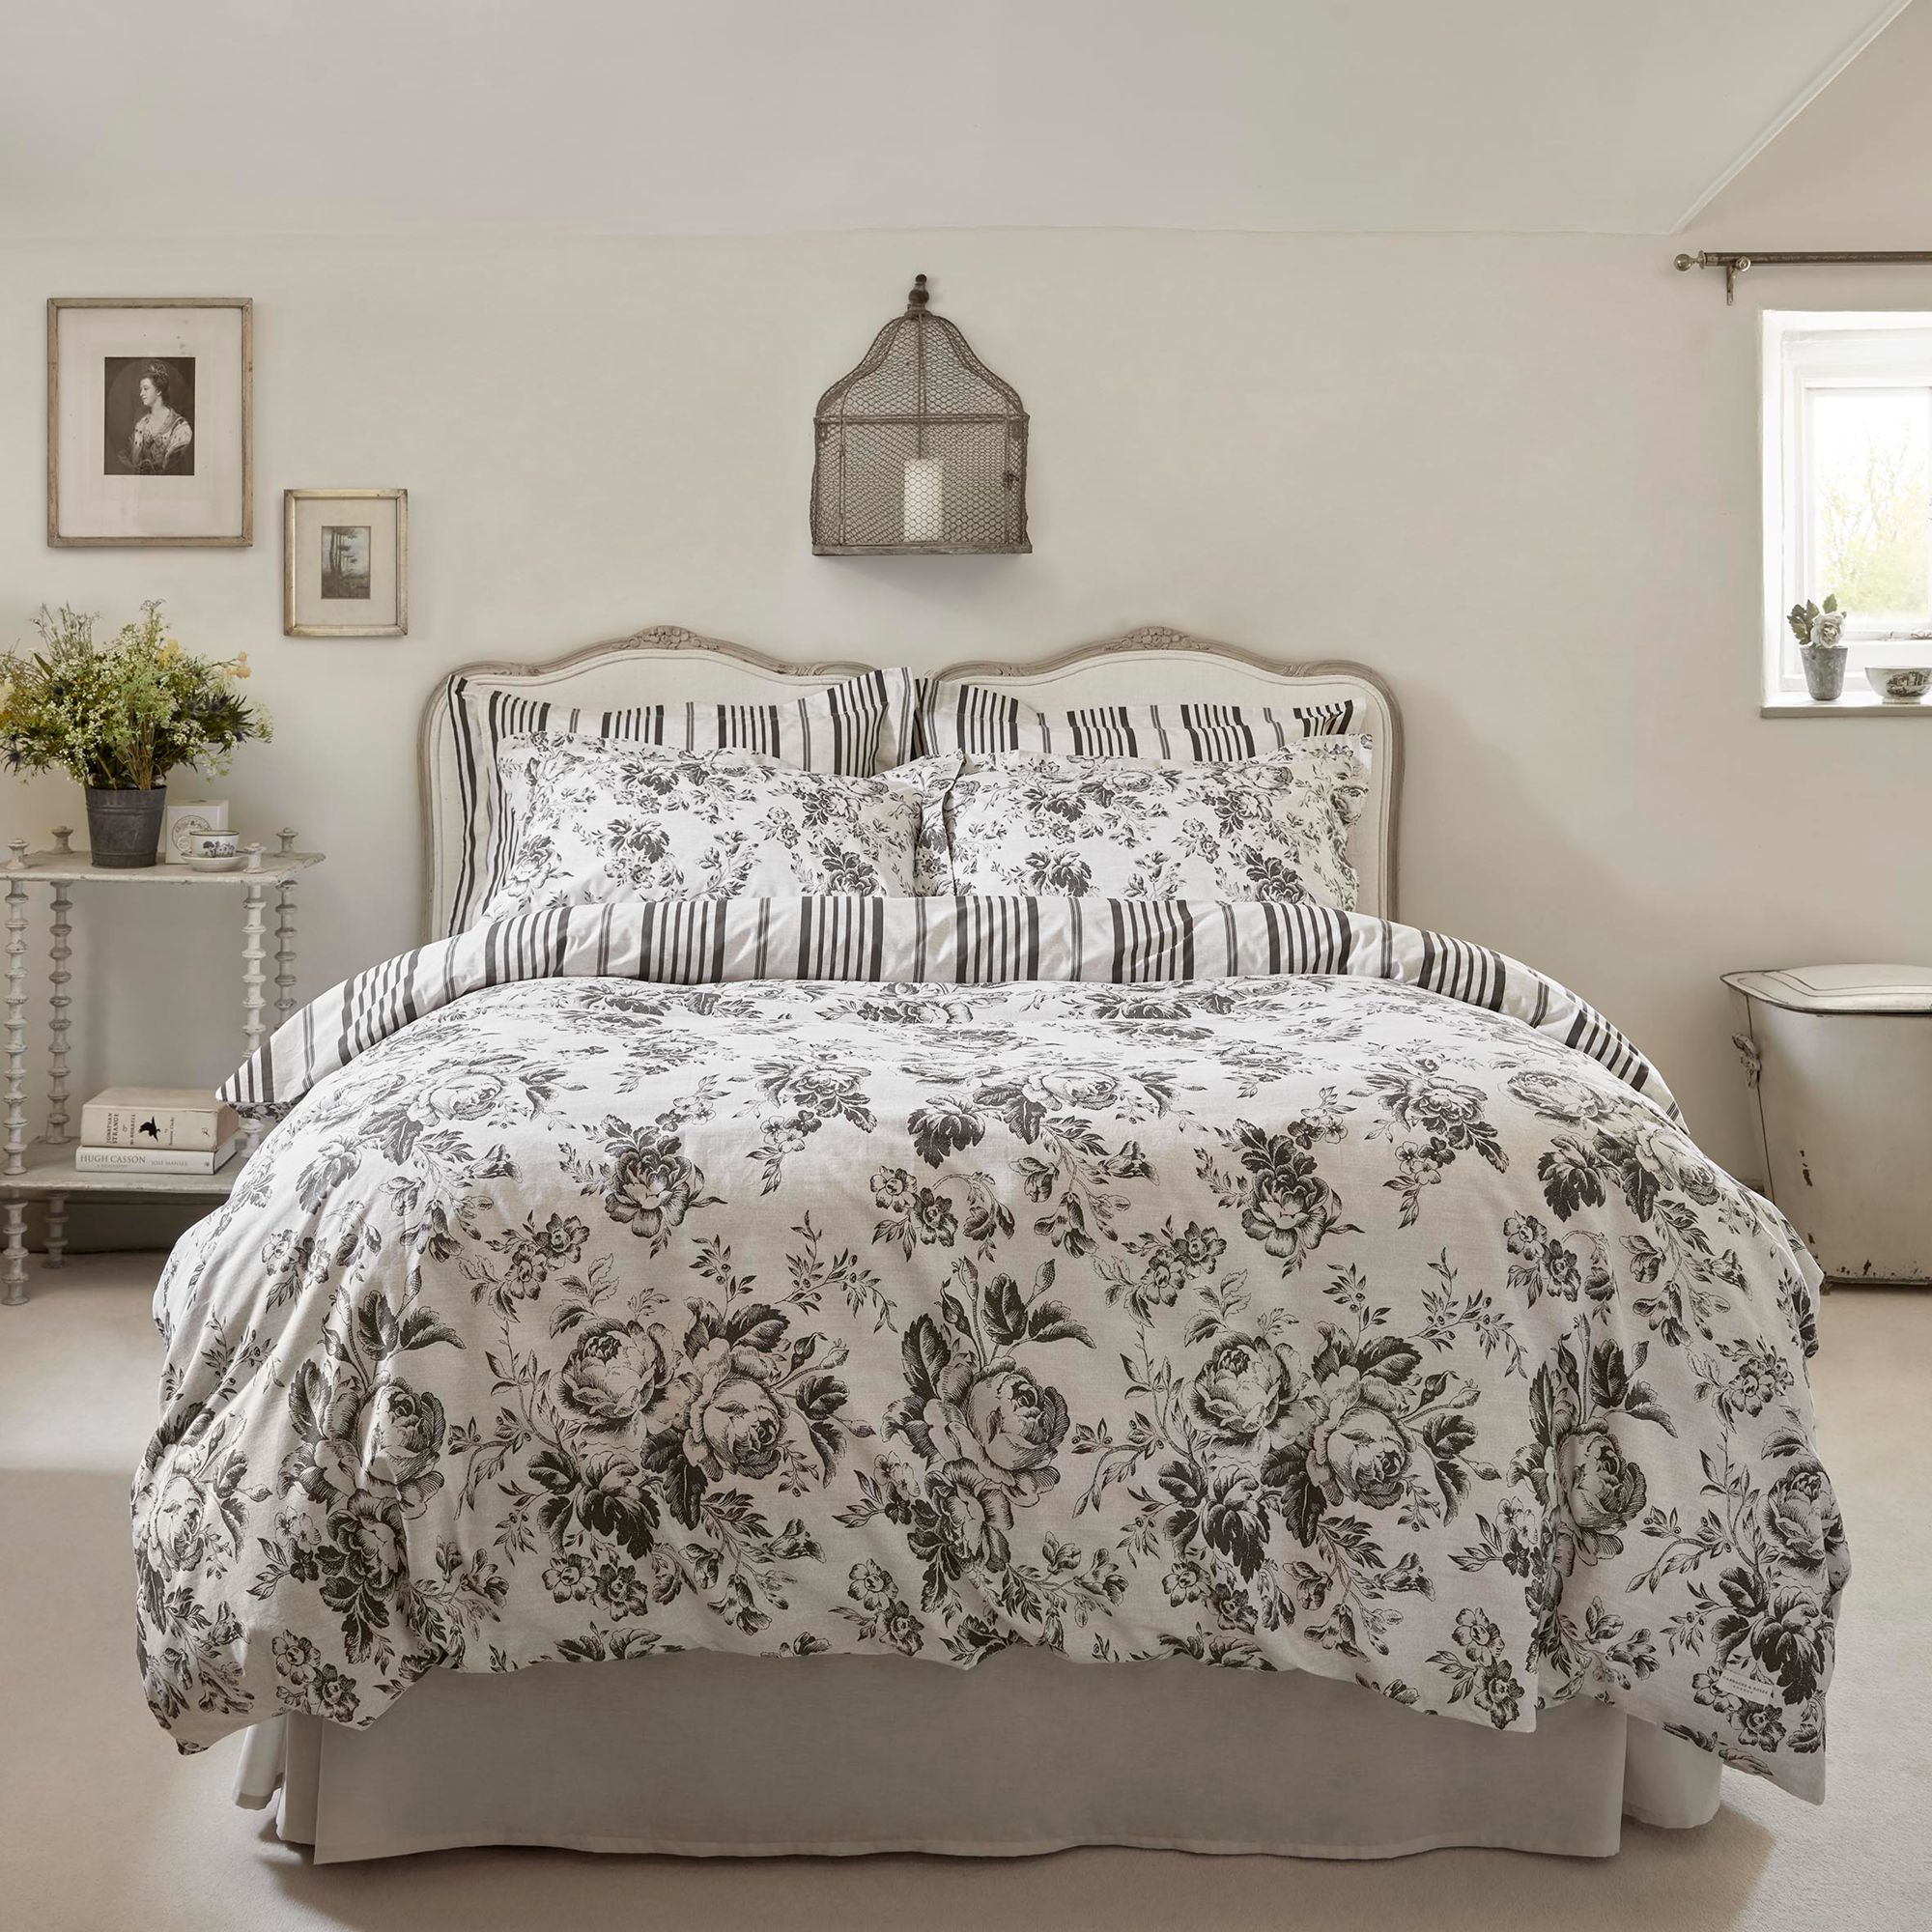 Cabbages Roses Paris Bedding Charcoal At John Lewis Partners